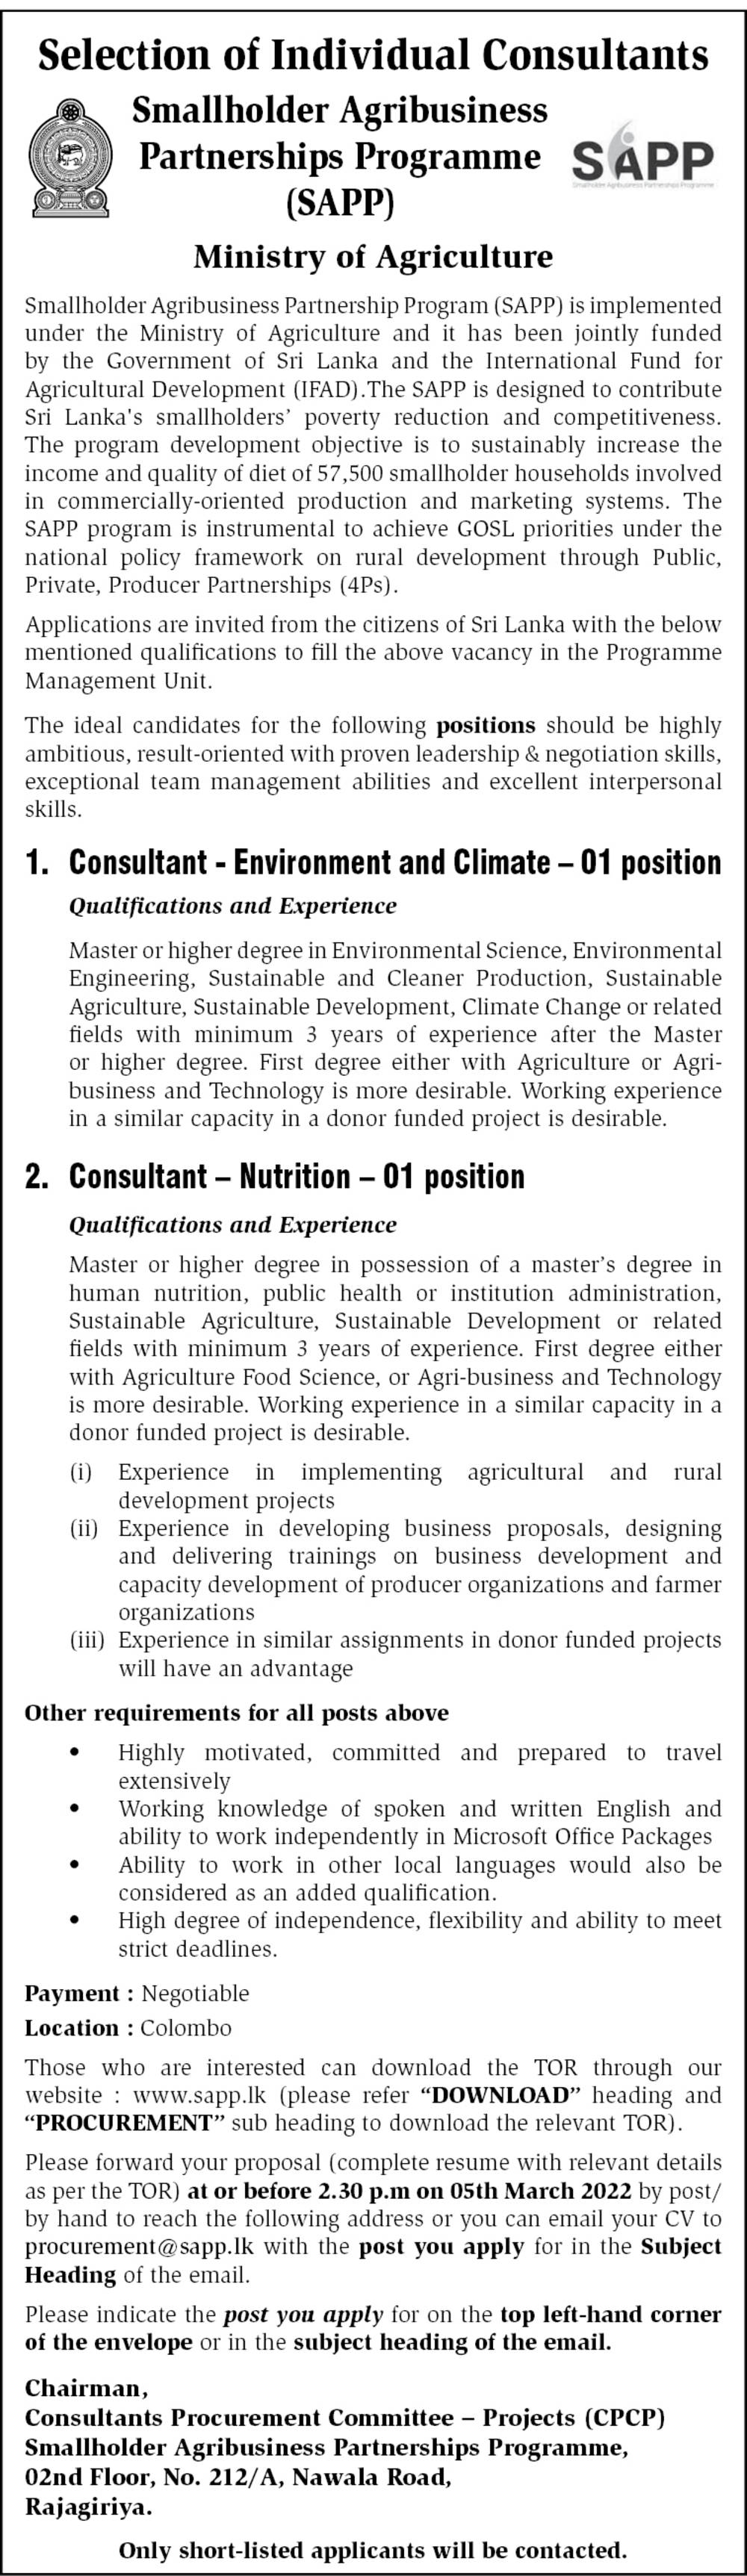 Consultant (Environment & Climate, Nutrition) Vacancies in Ministry of Agriculture